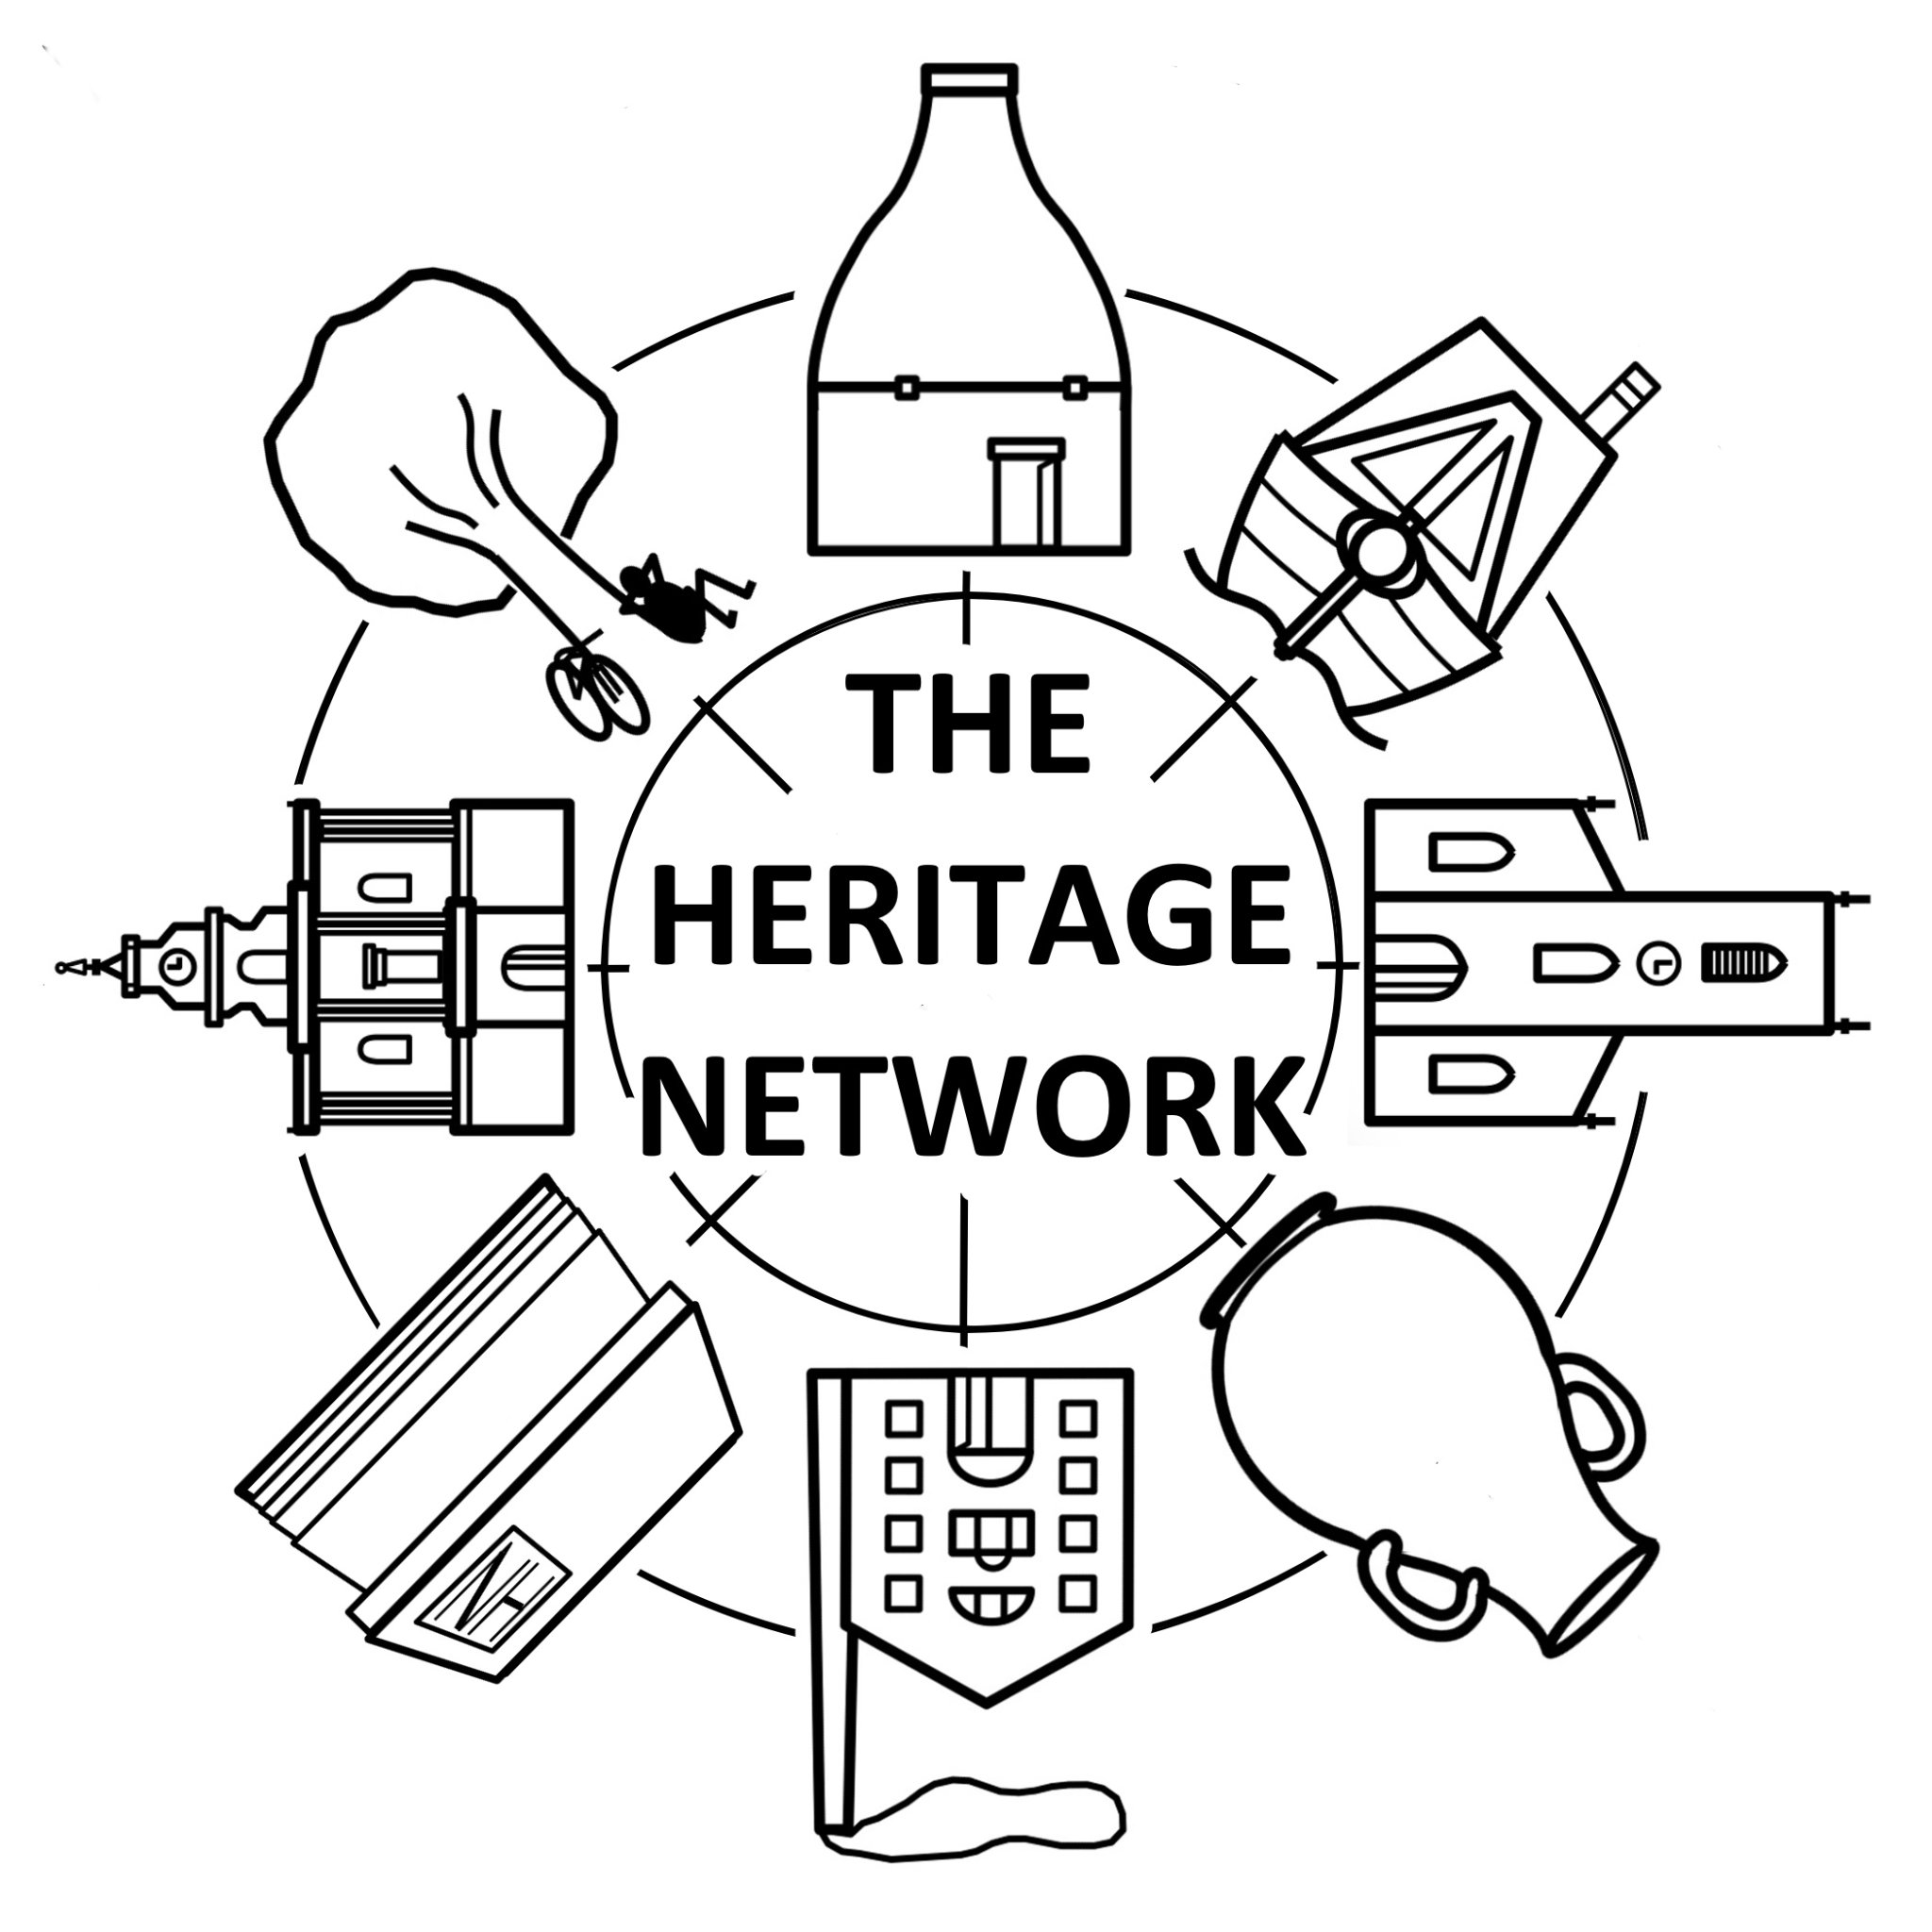 The Heritage Network for Stoke-on-Trent is a partnership between heritage enthusiasts and the custodians of heritage buildings, museums and collections